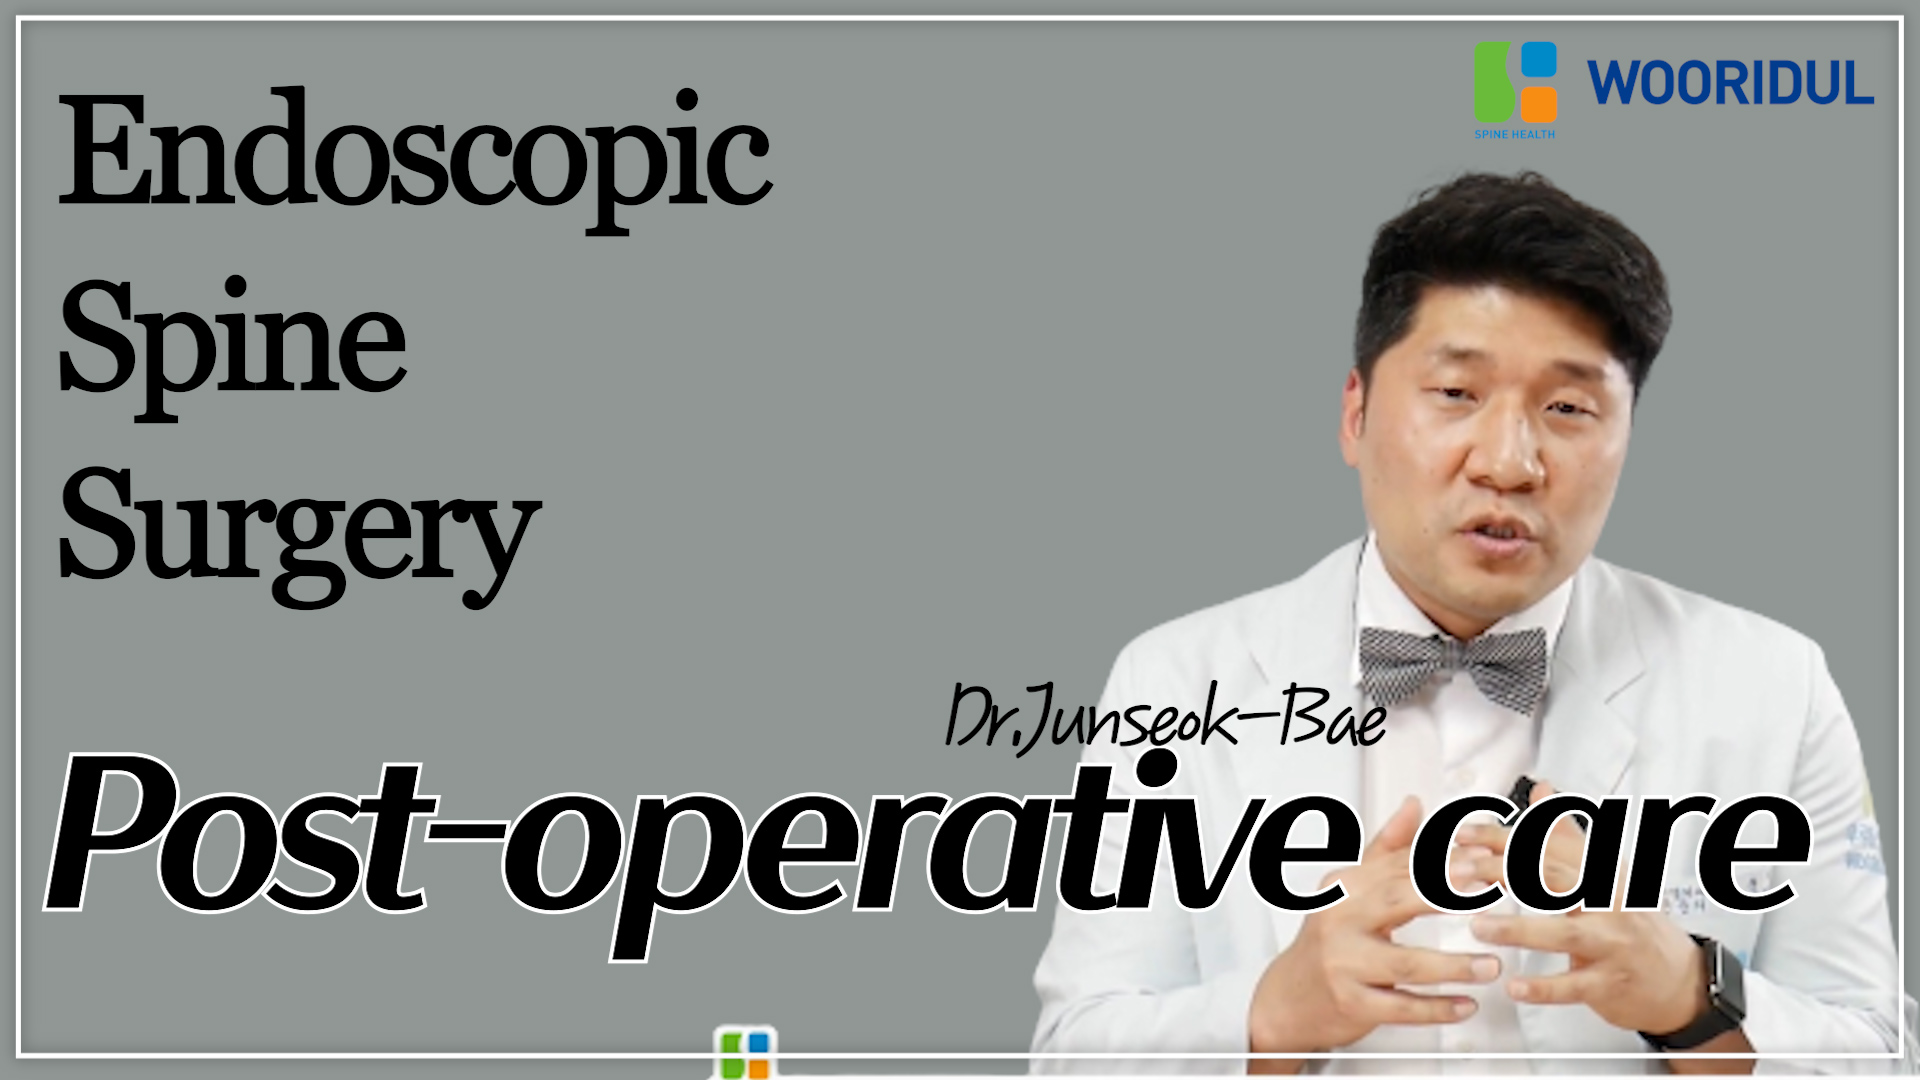 Post-operative care after endoscopic spine surgery/Precautions & Activity Guidelines for each month